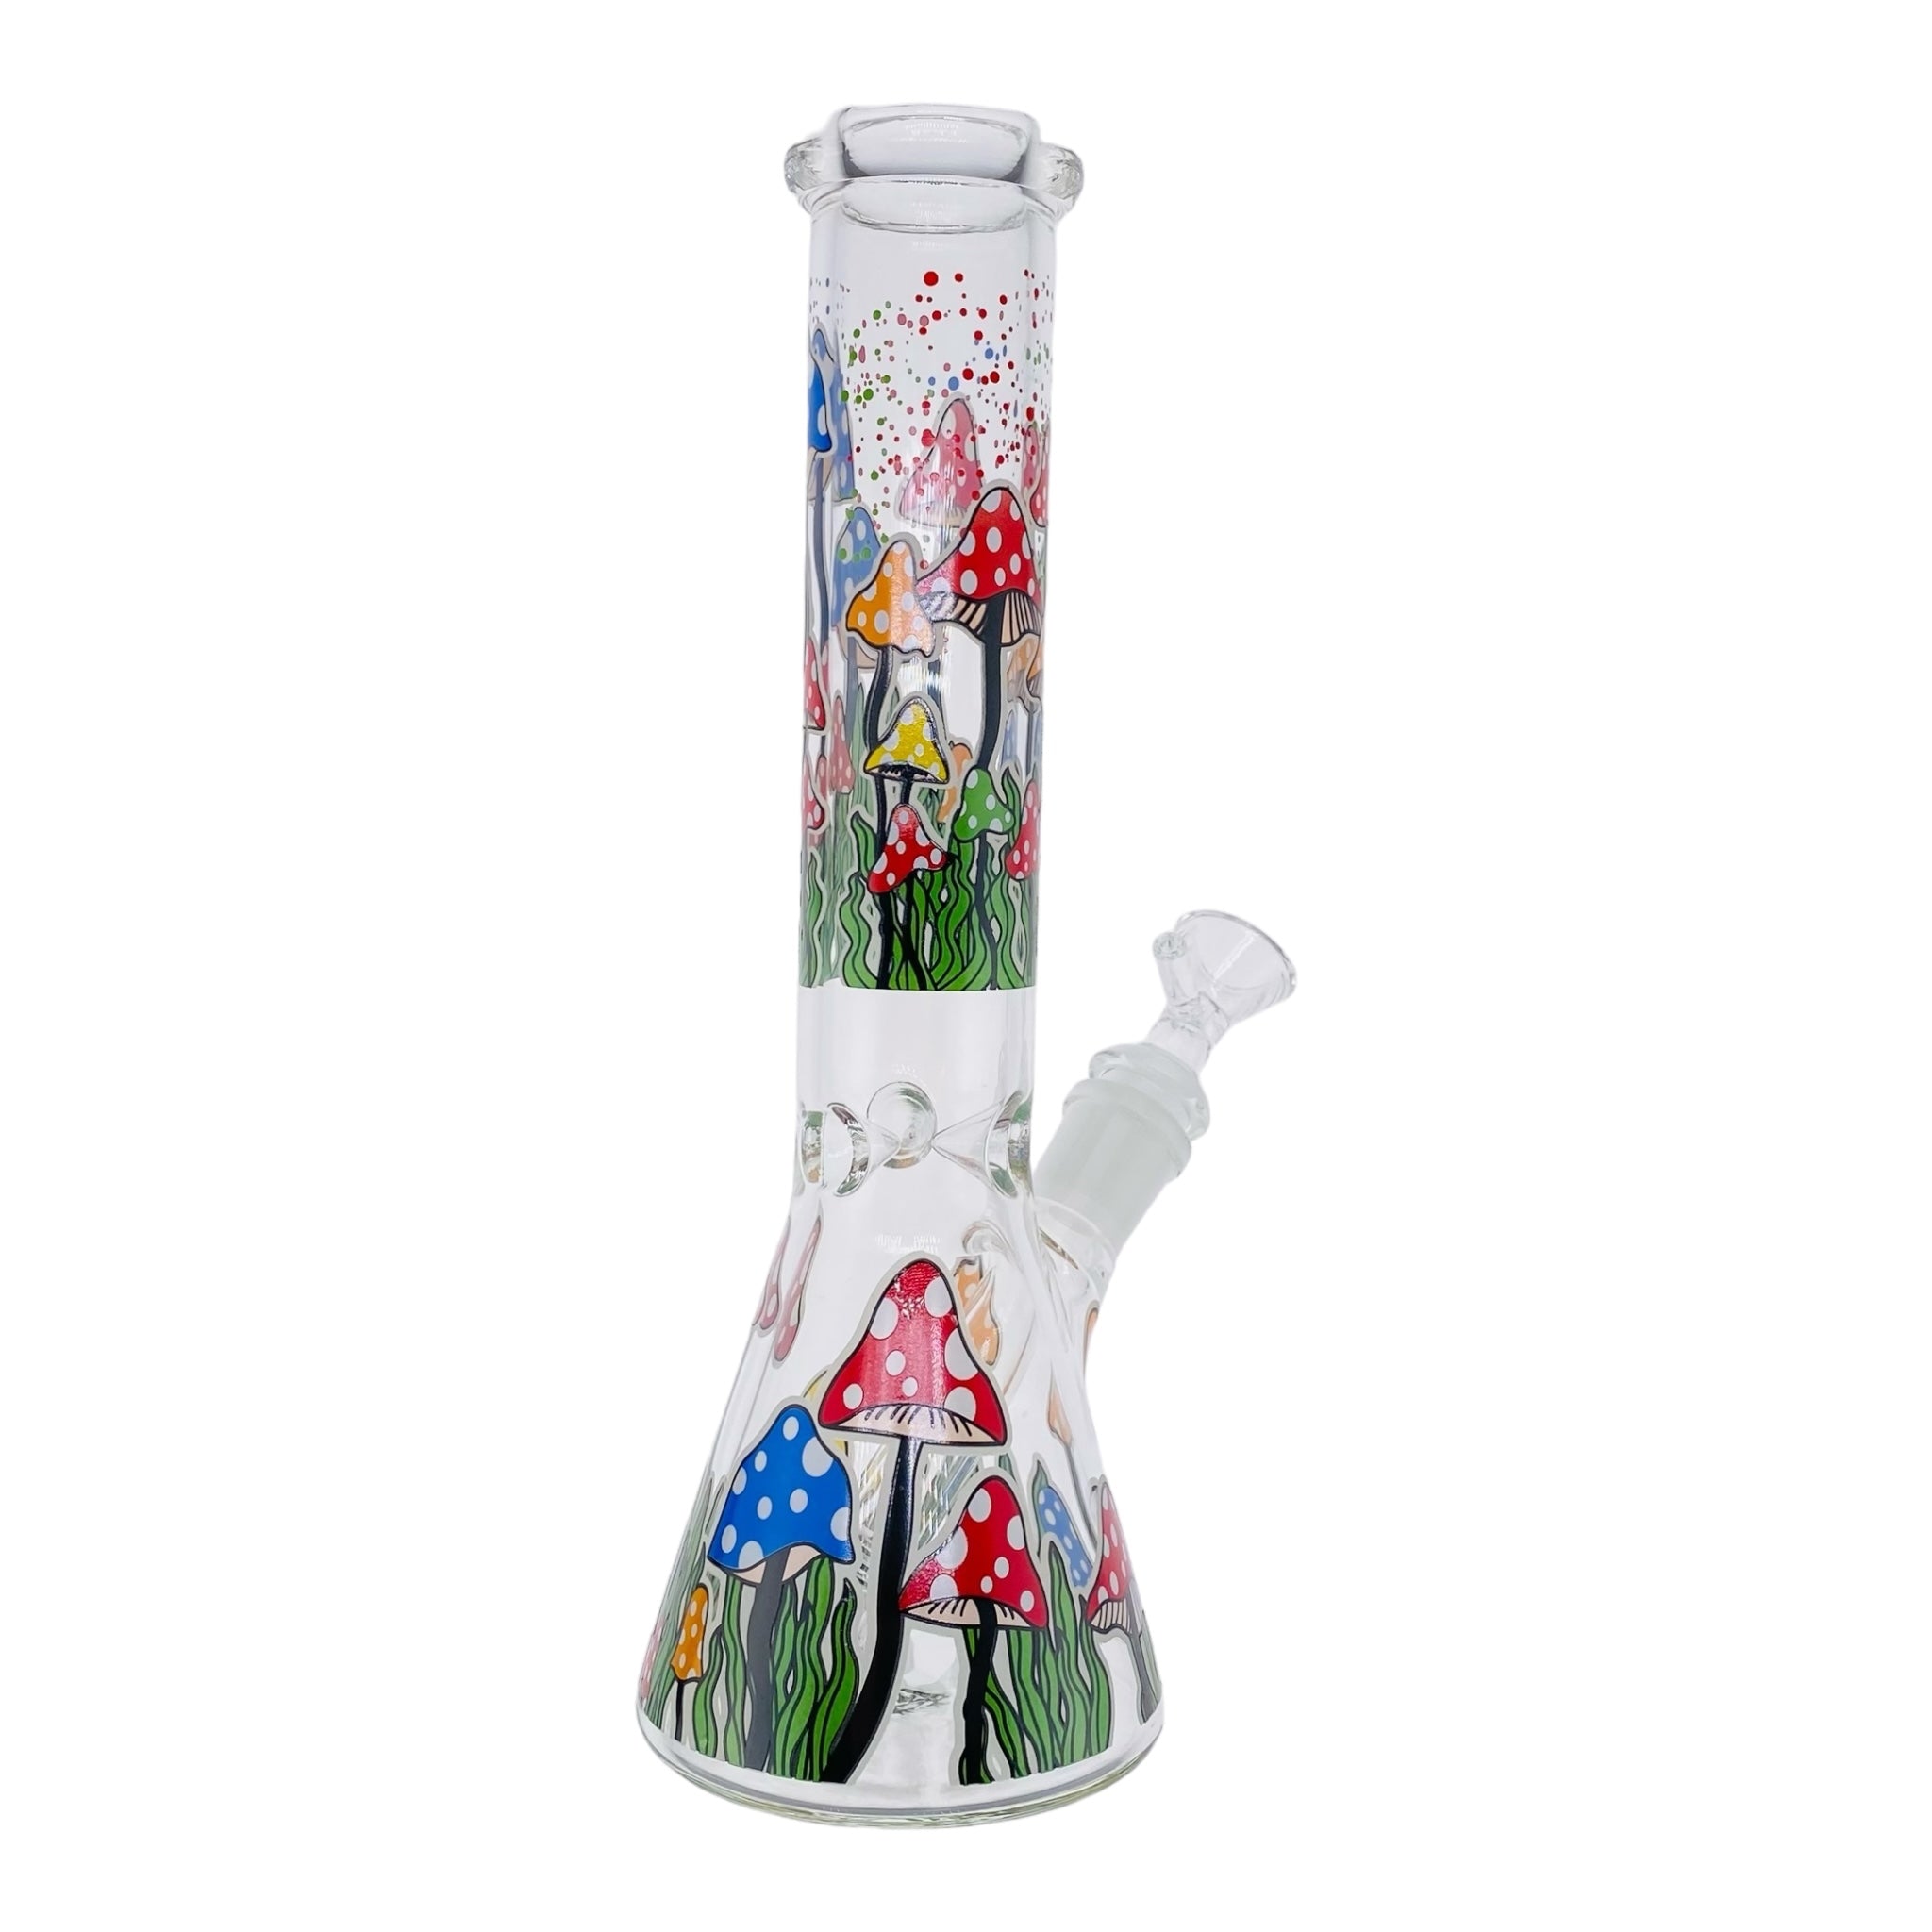 cute Colorful Magical Mushroom Beaker Bong 10 Inches for sale free shipping